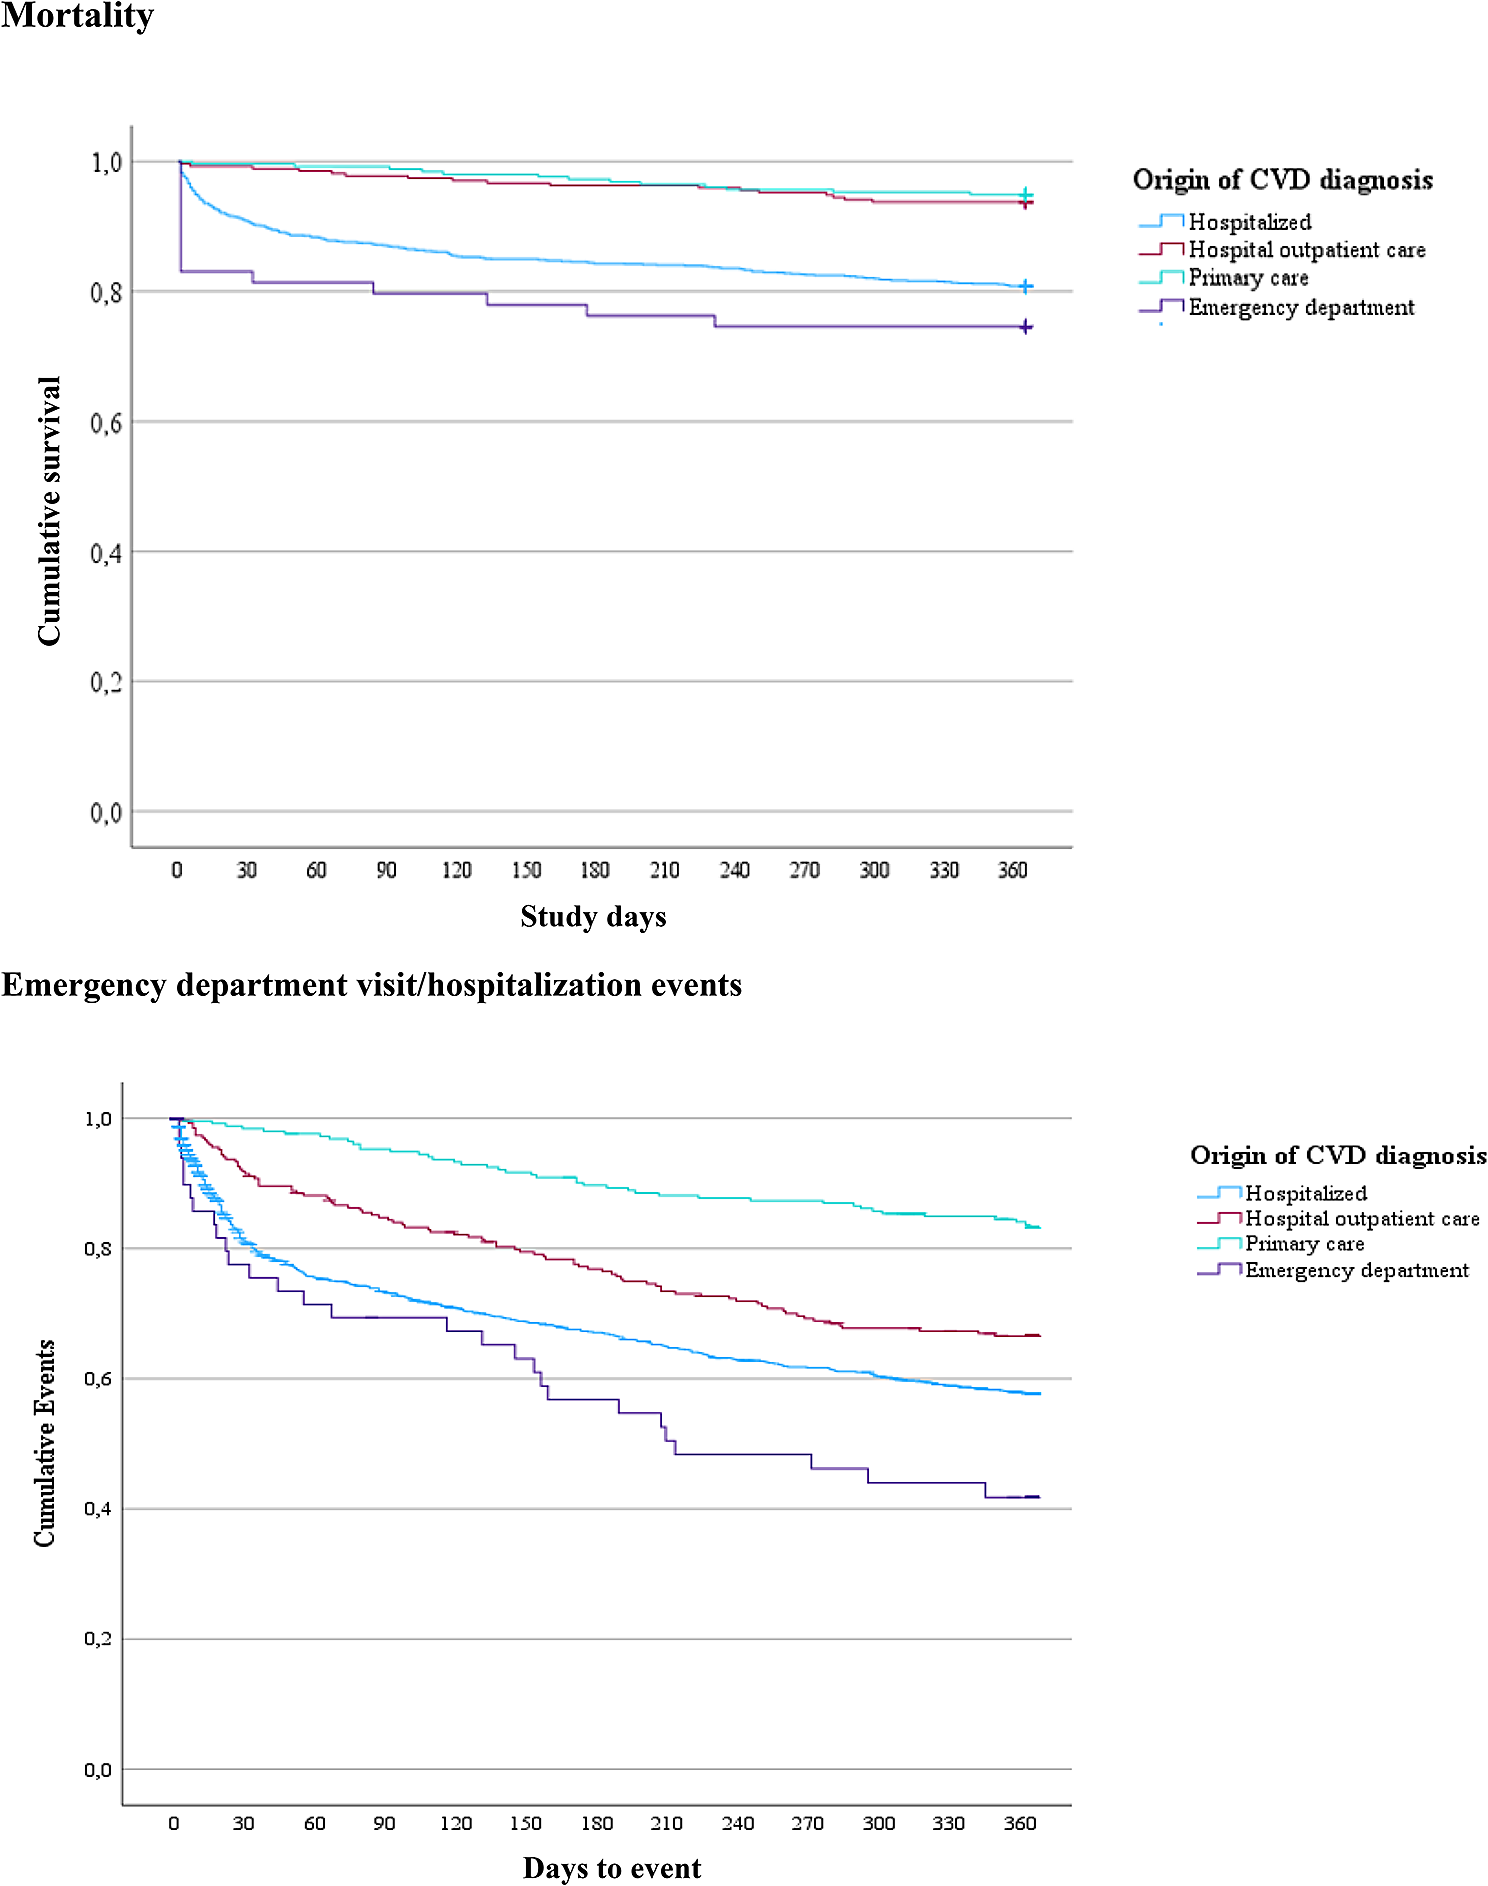 Factors influencing hospitalization or emergency department visits and mortality in type 2 diabetes following the onset of new cardiovascular diagnoses in a population-based study